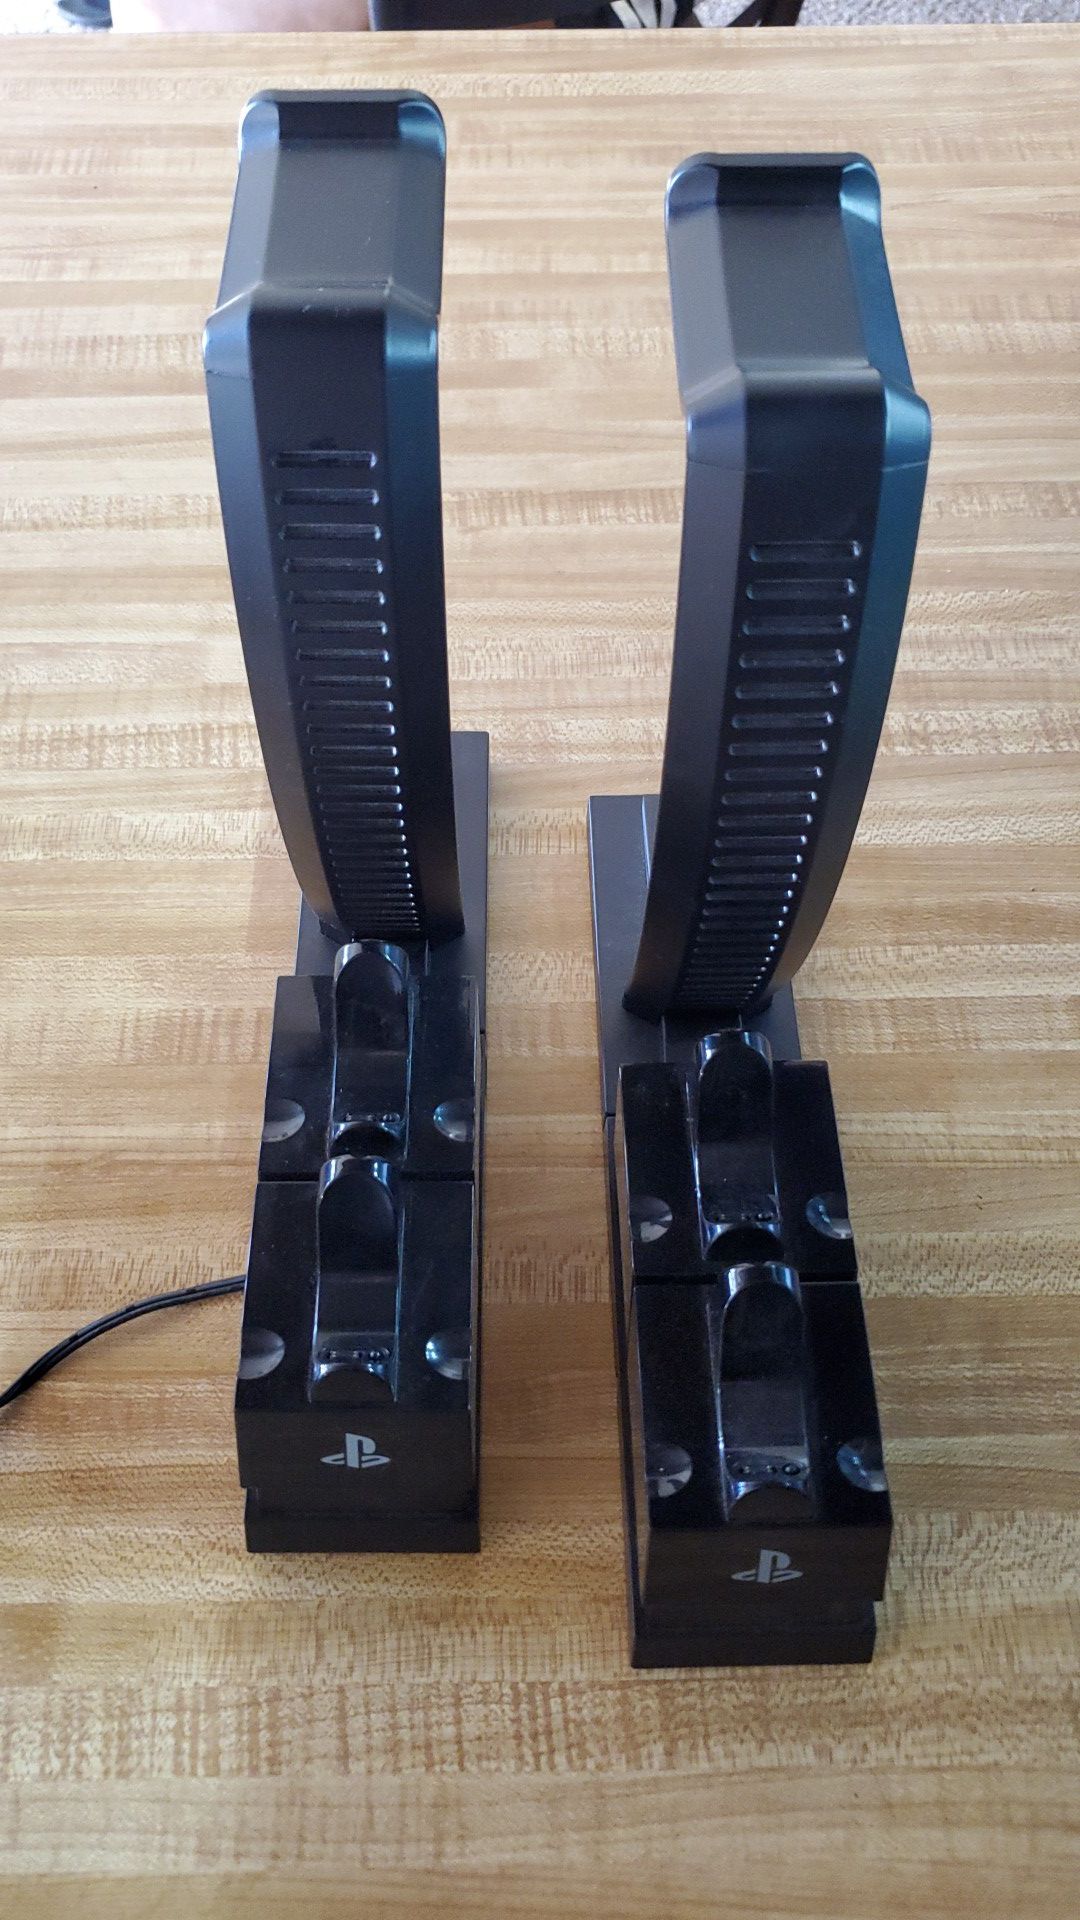 Playstation Head Phone Holders And Two Controller Chargers A Piece